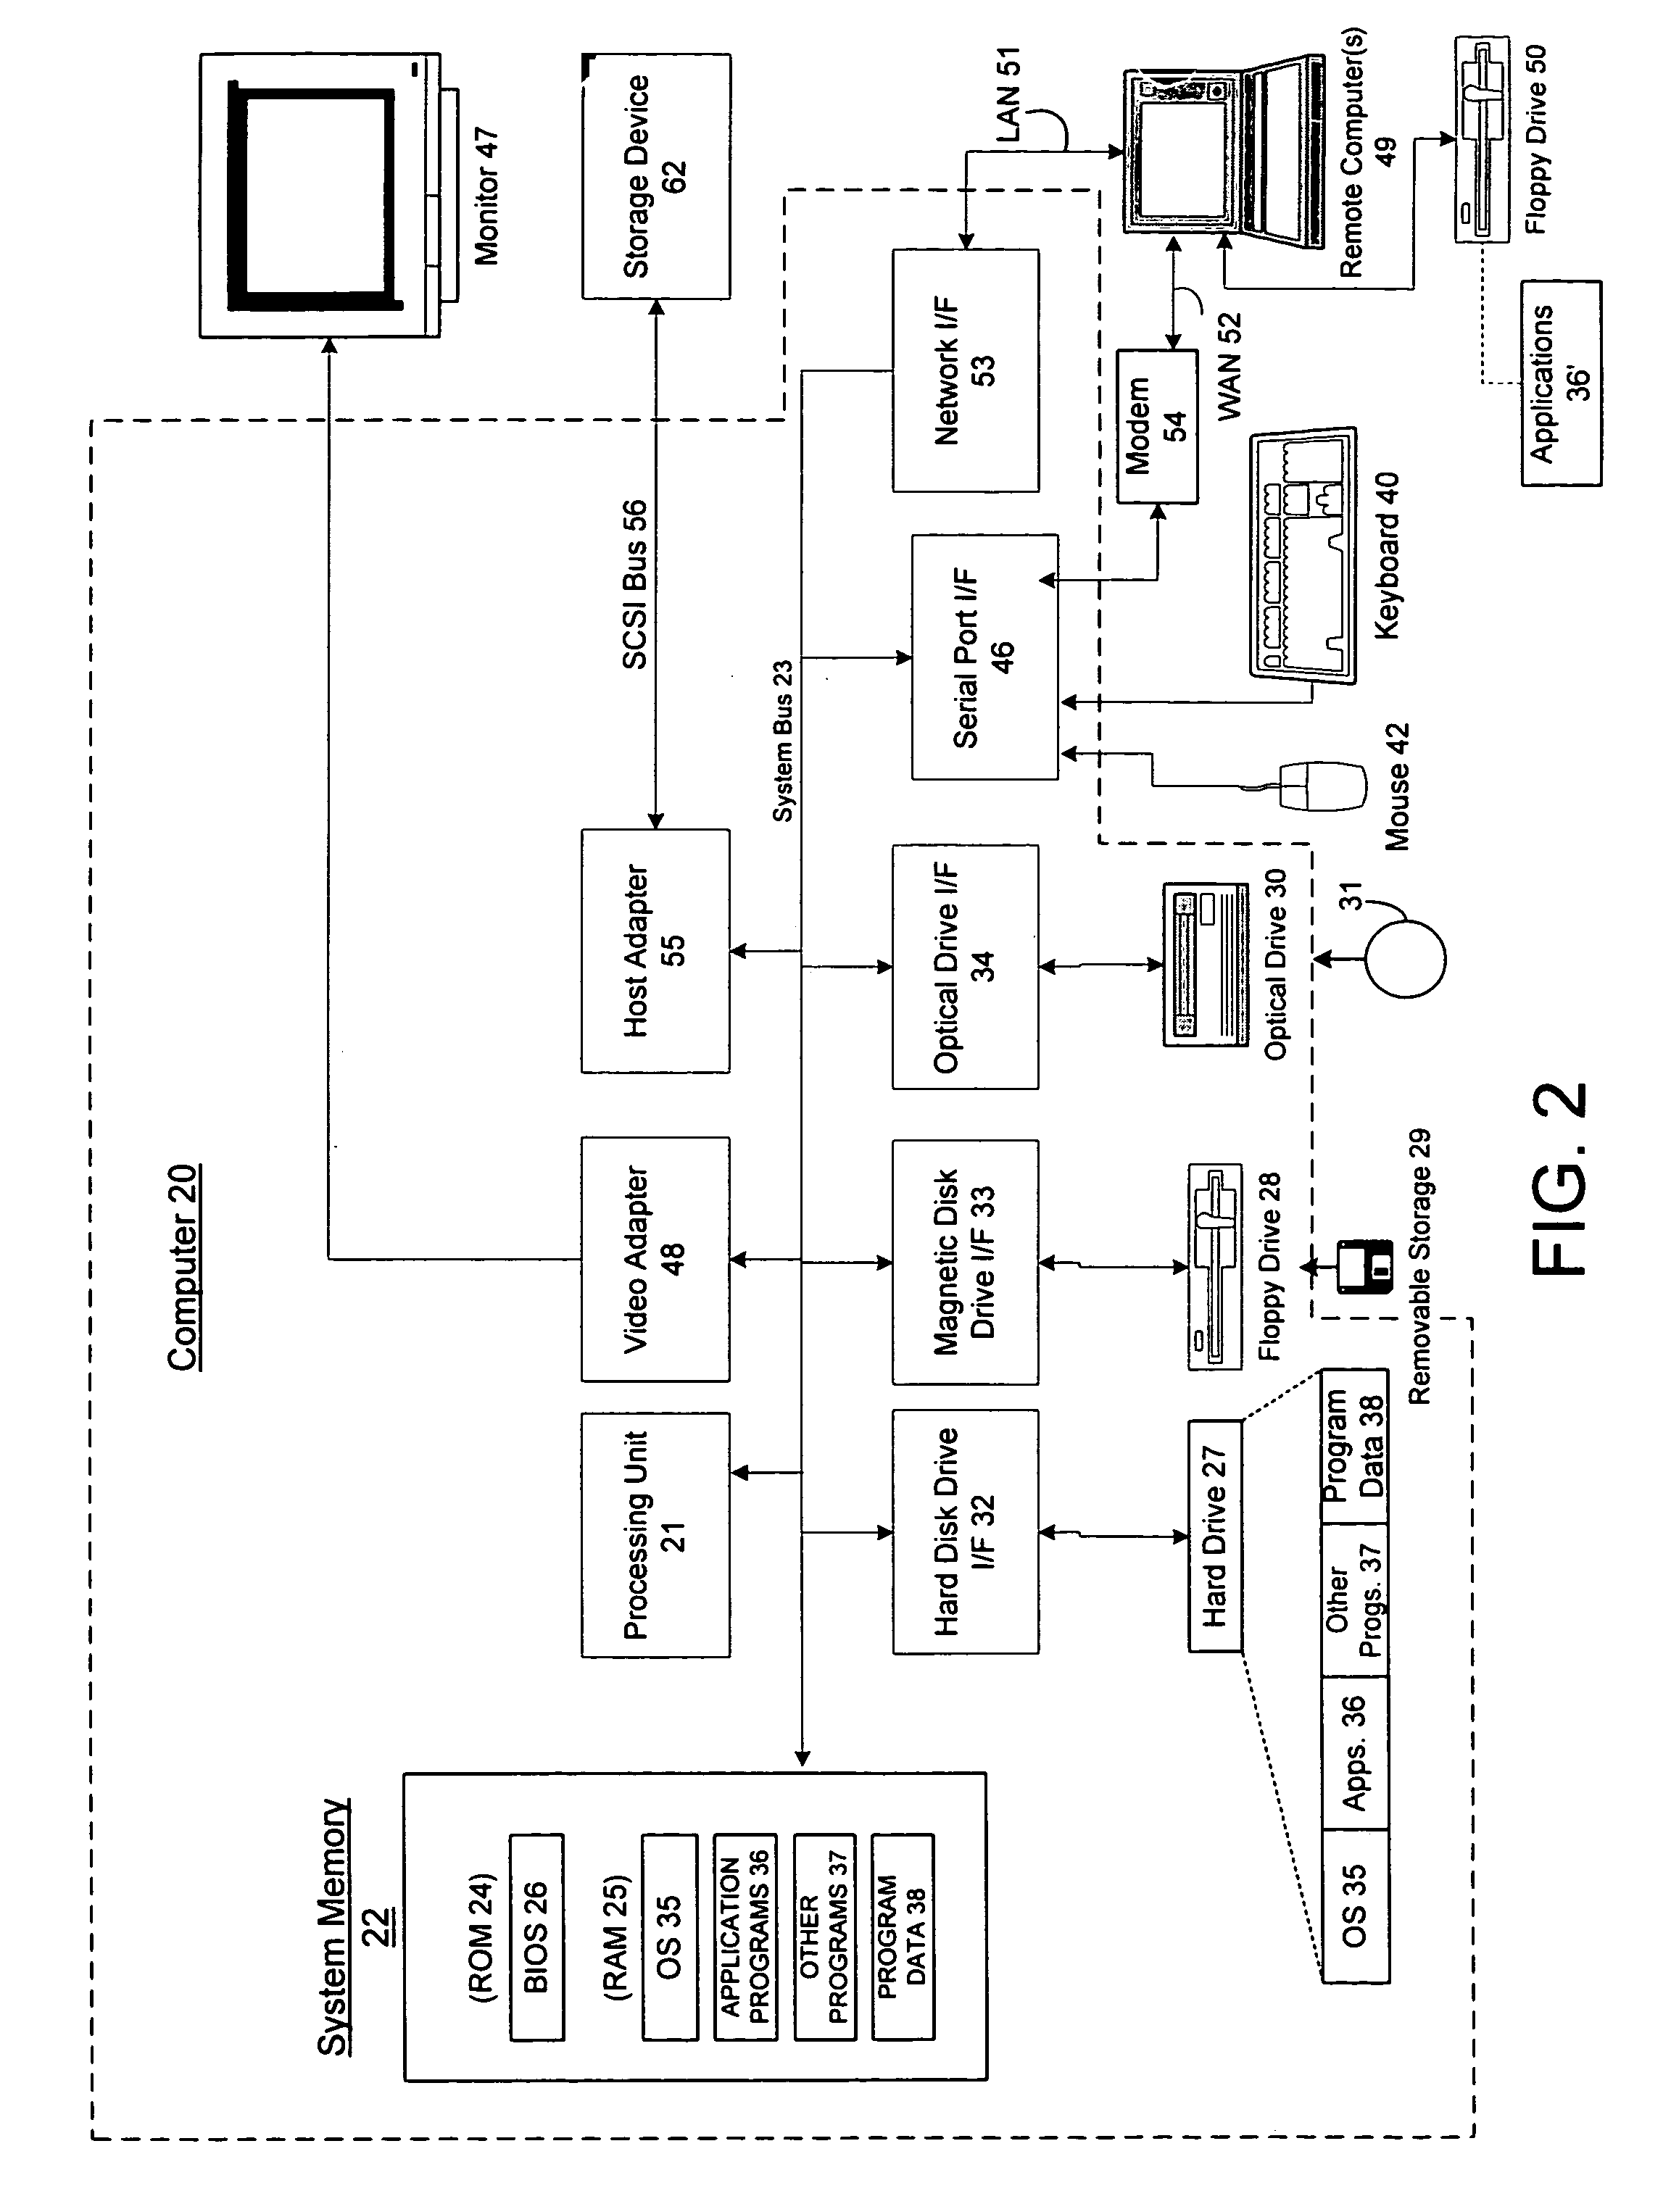 Inter-server communication using request with encrypted parameter